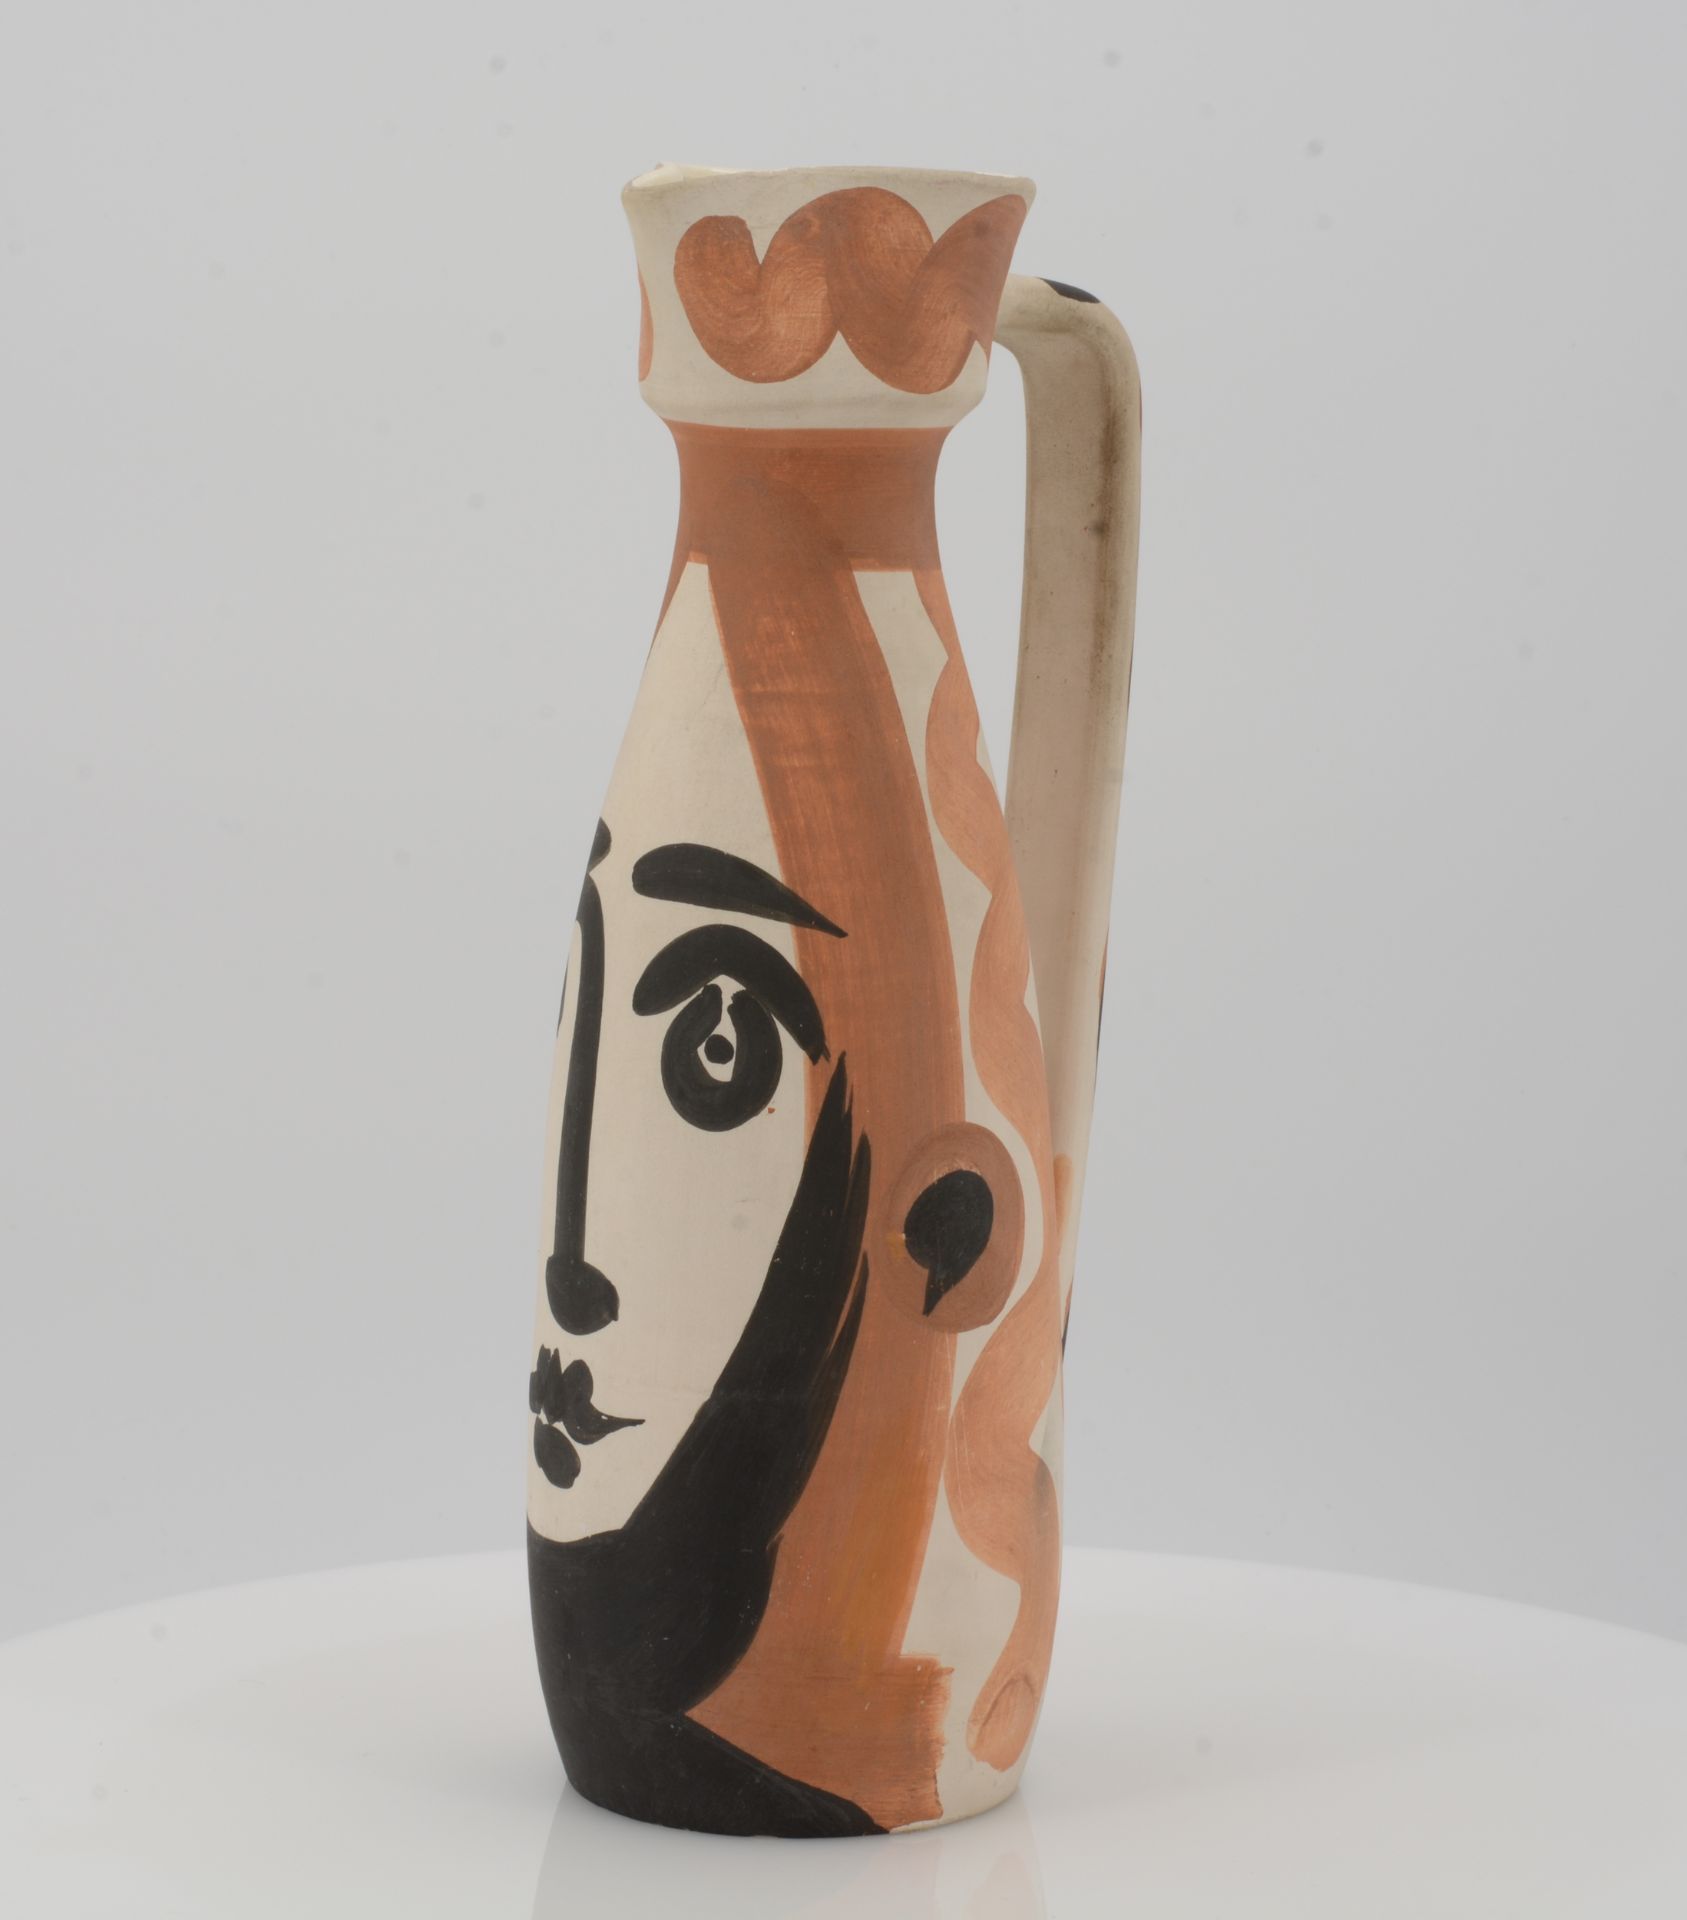 Picasso, Pablo1881 Malaga - 1973 MouginsFace. 1955. White earthenware clay, polychromed and glazed - Image 3 of 9